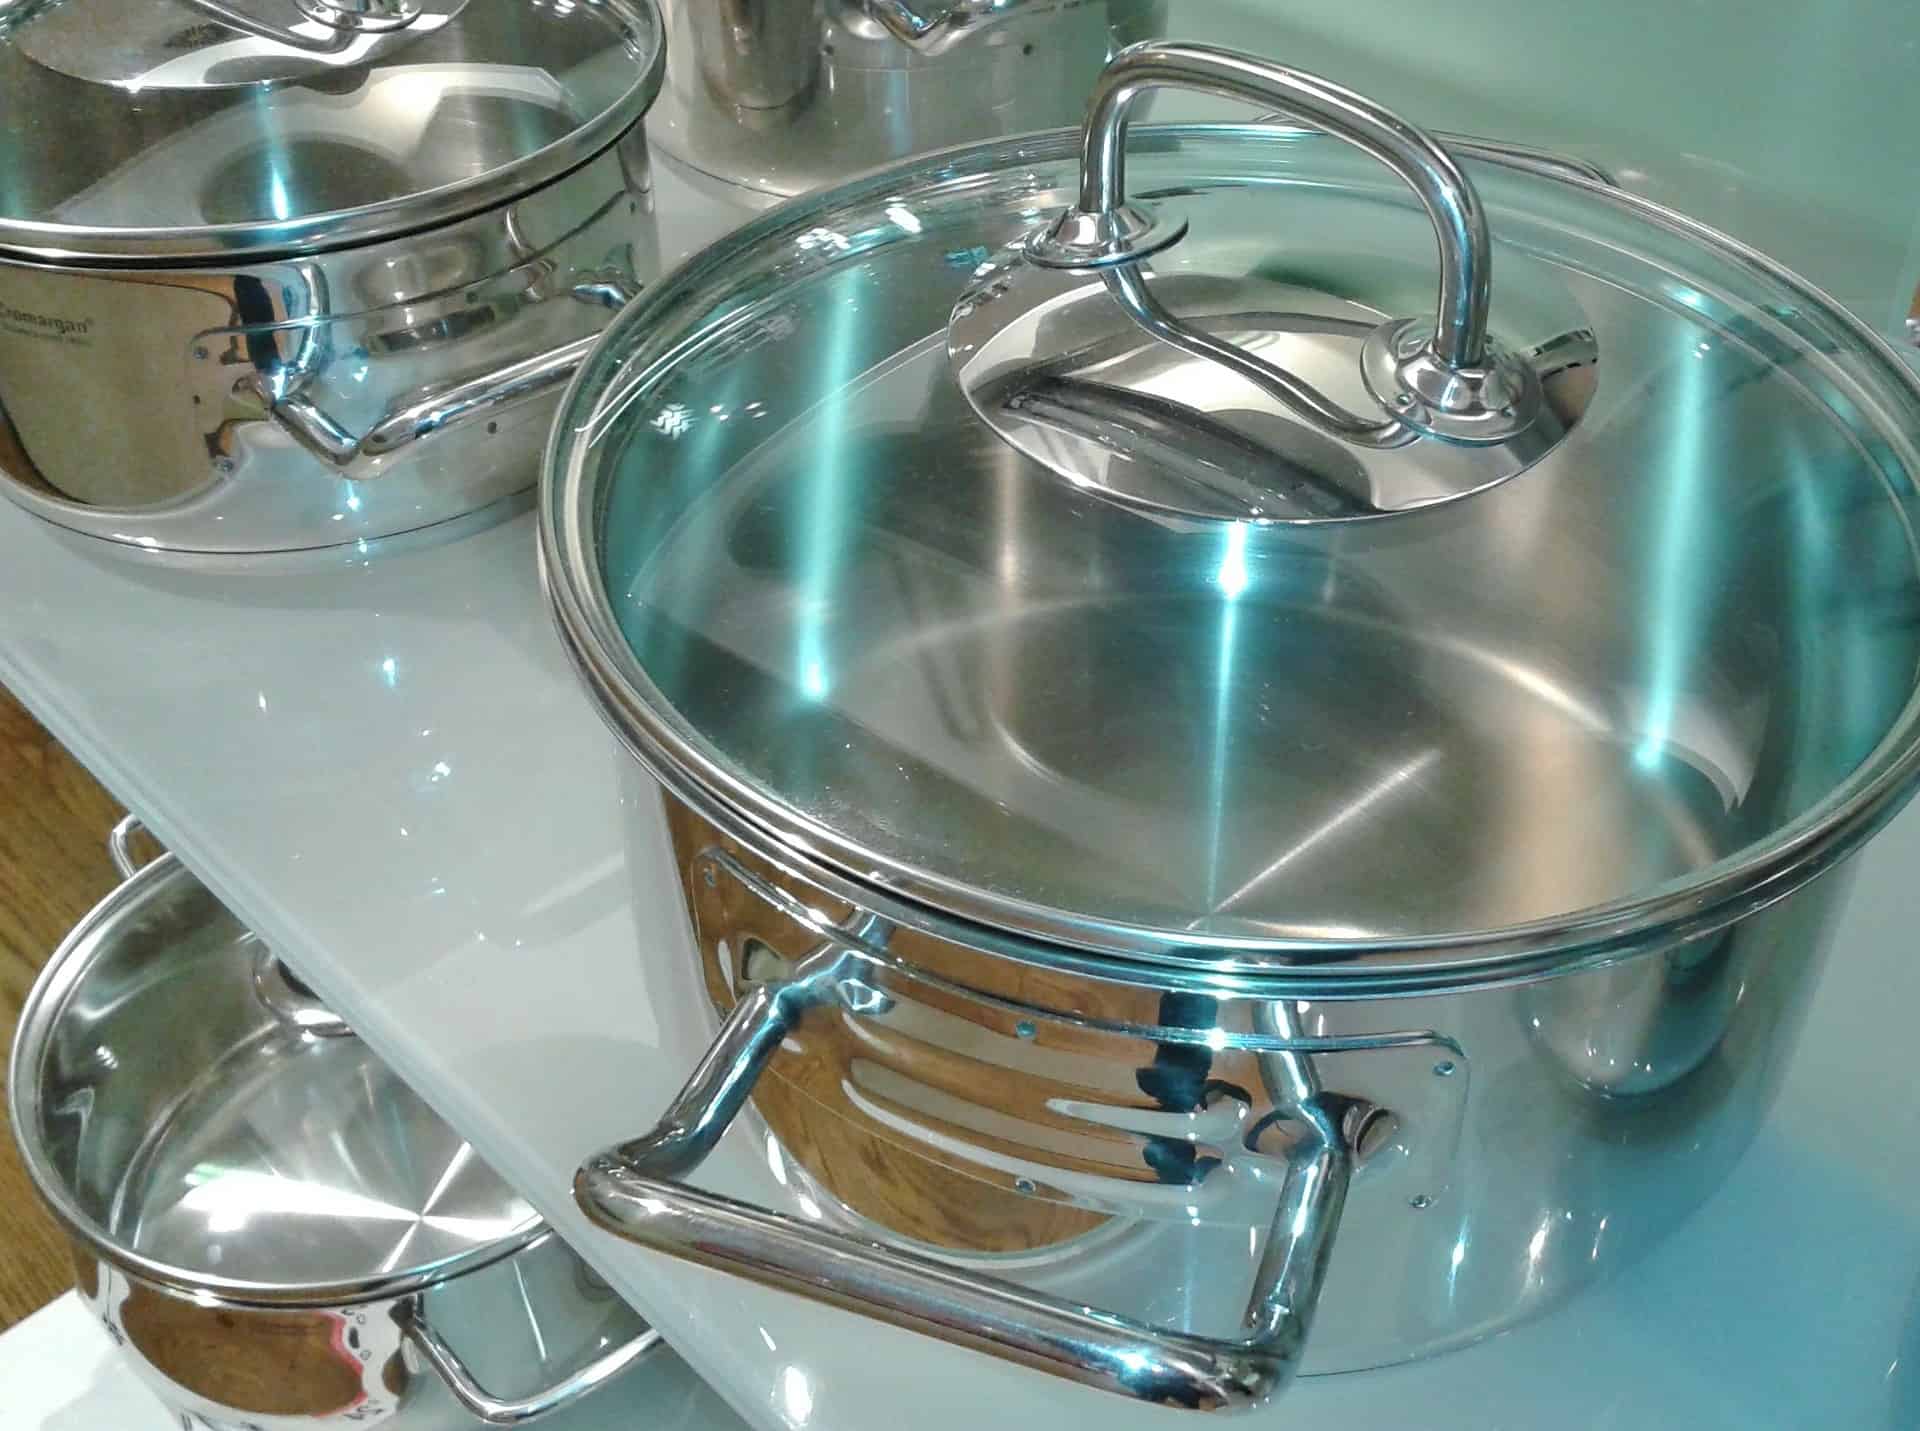 Are Hexclad Pans Worth It? Not if PTFE is a Concern - LeafScore